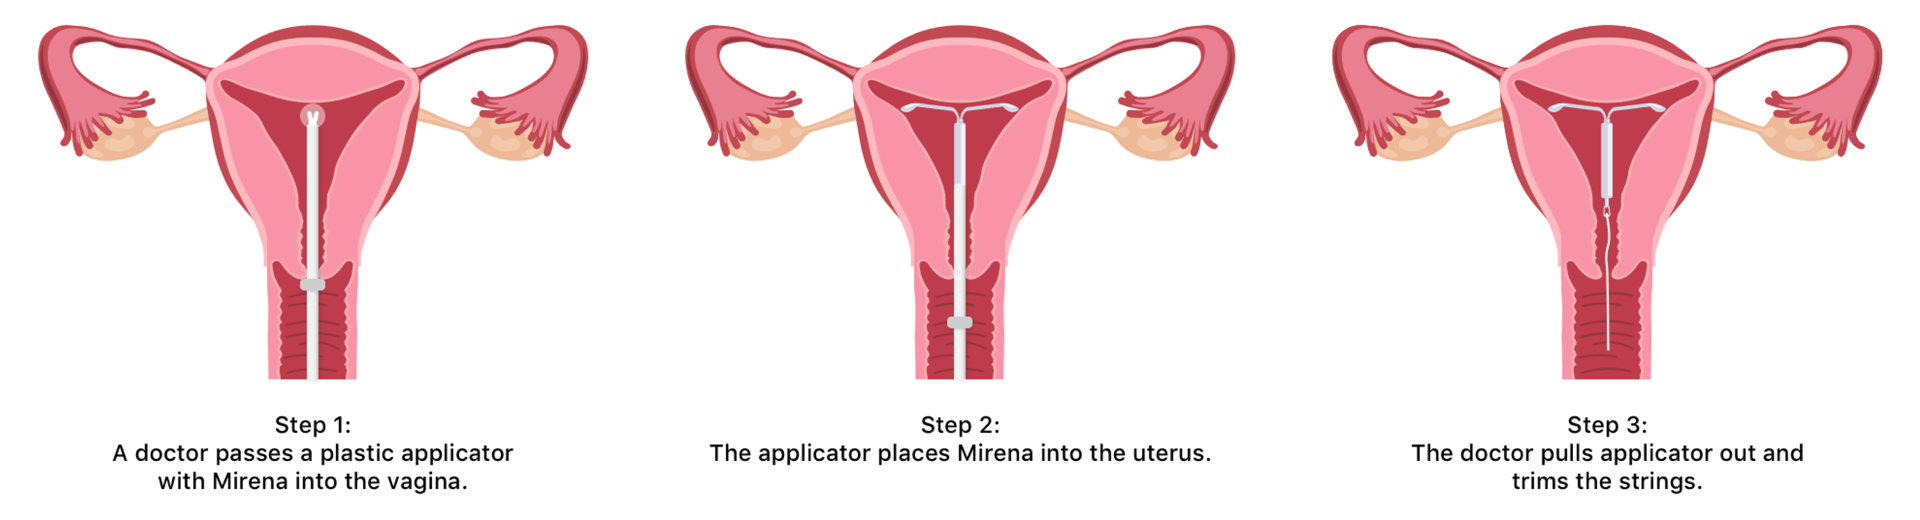 Mirena Insertion What To Expect With Mirena IUD PlacementSexiezPix Web Porn